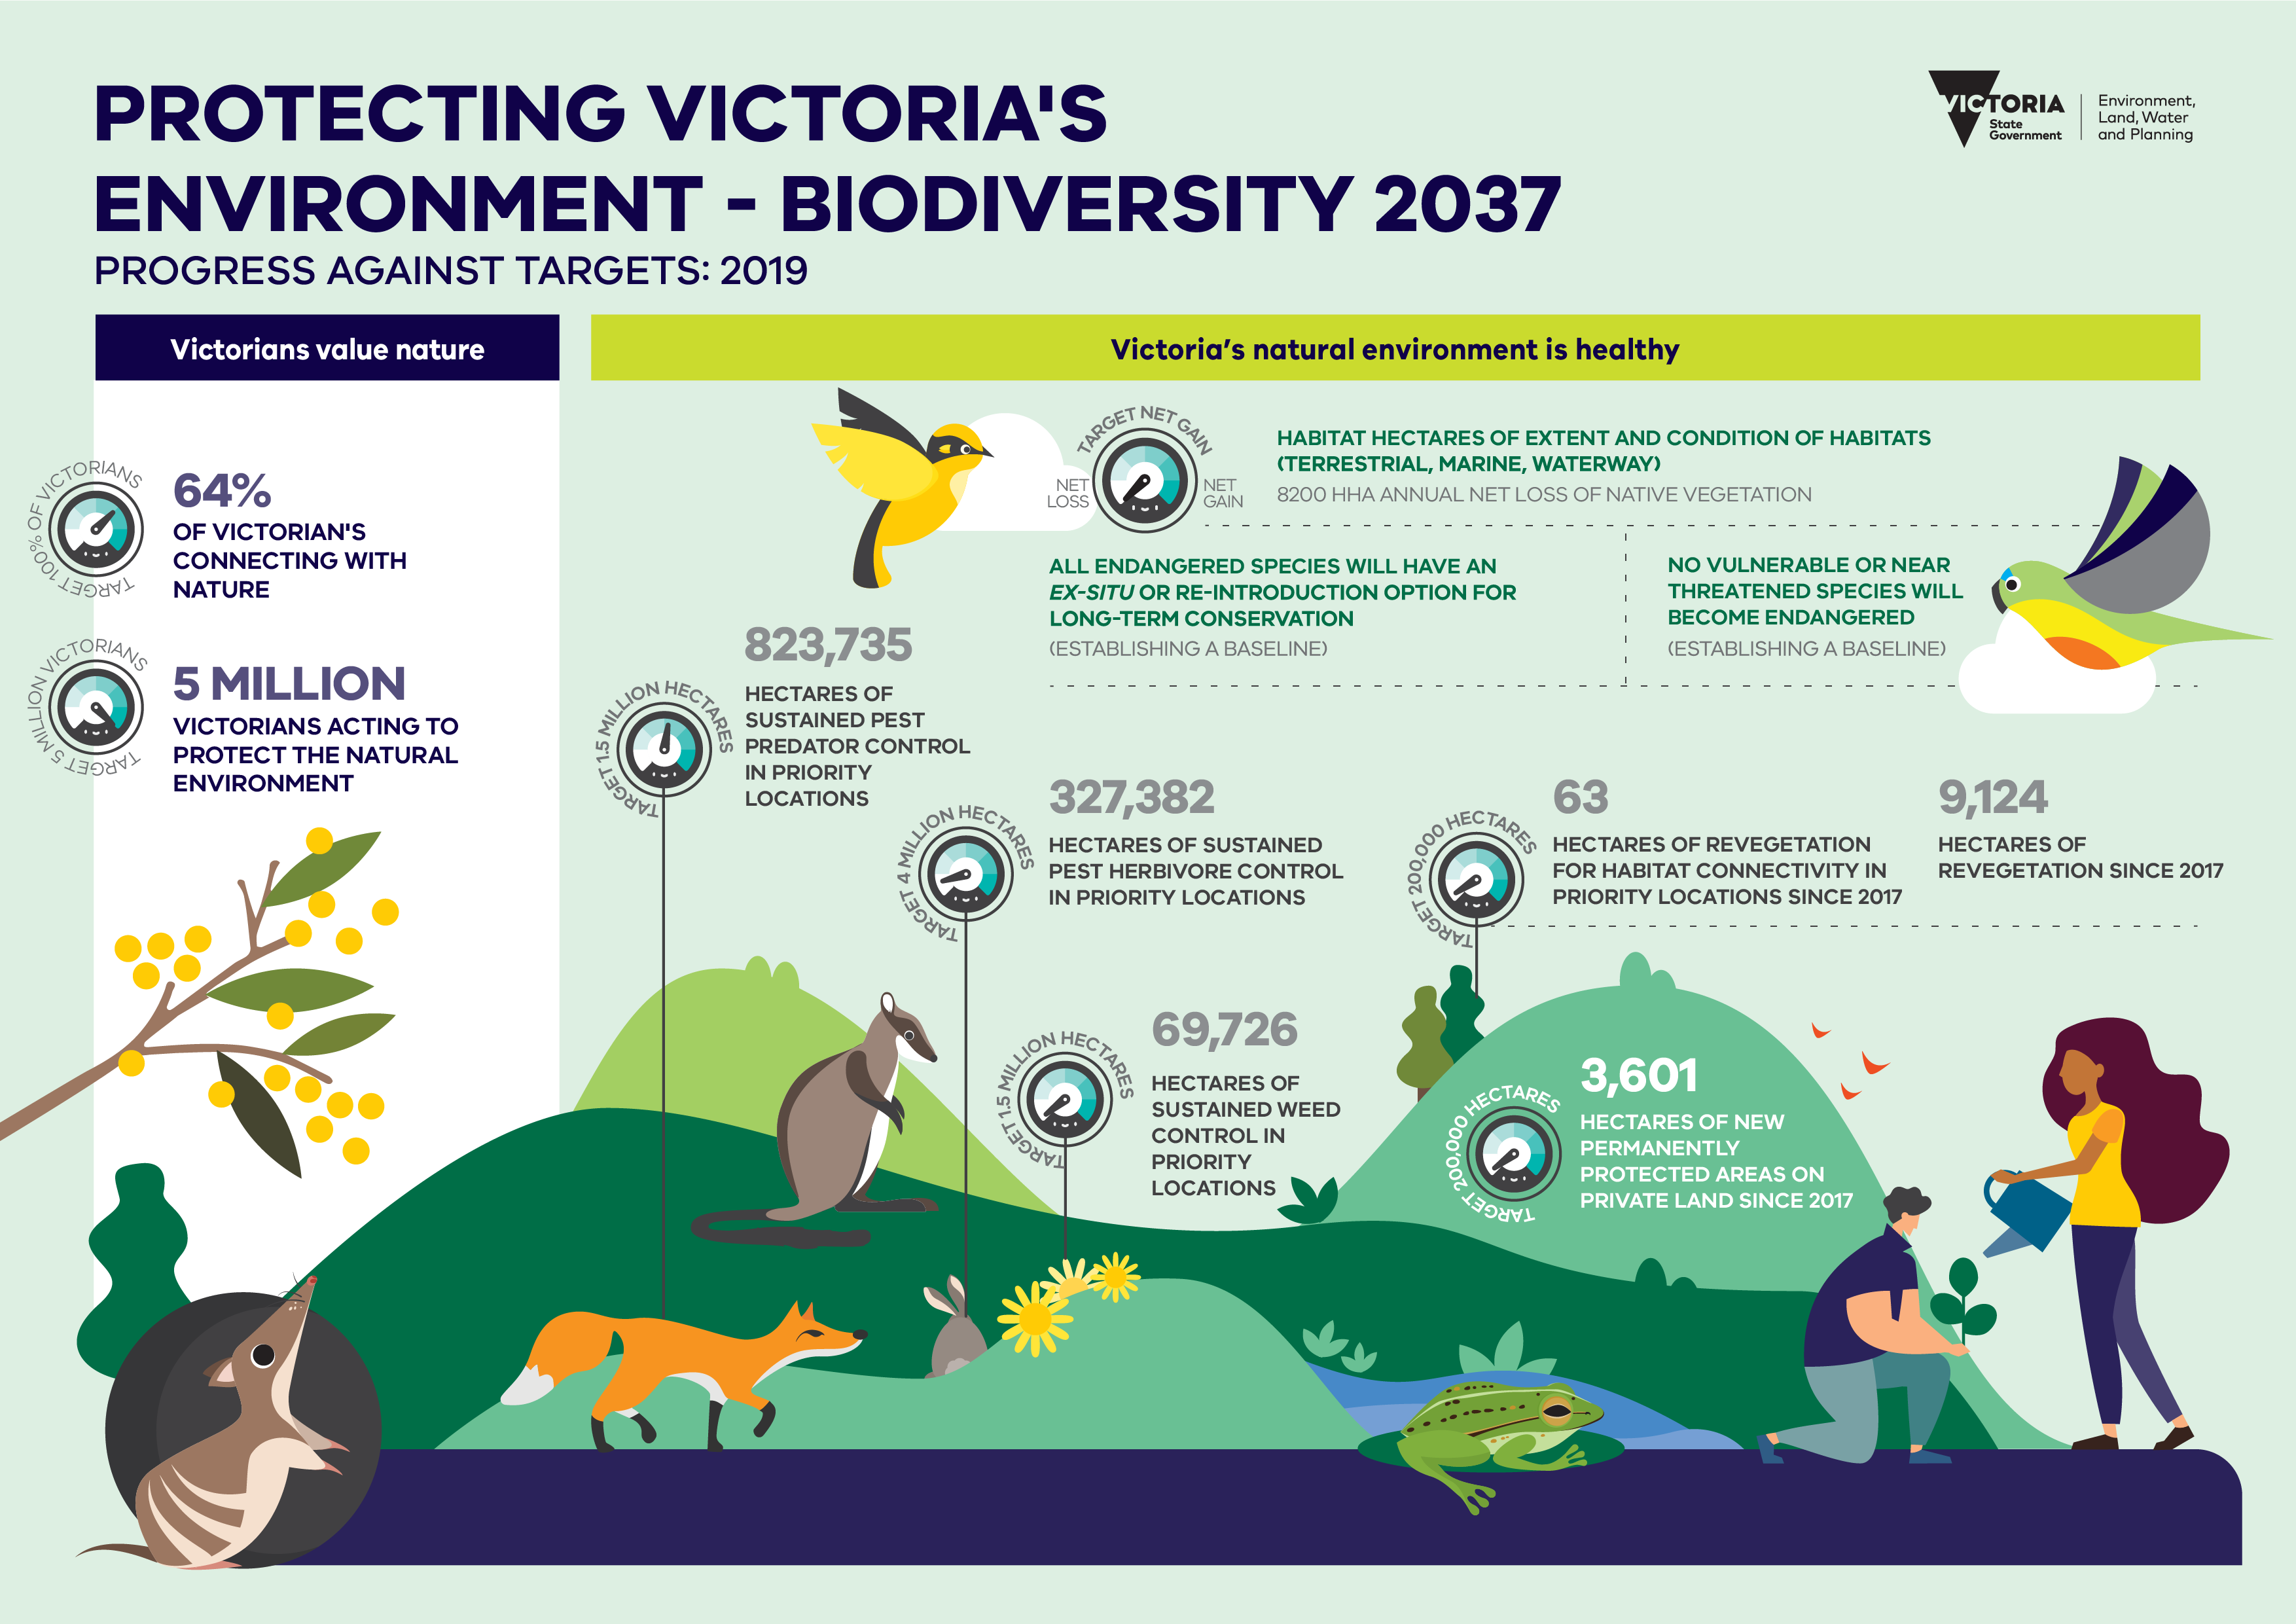 This infographic describes how Victoria is tracking against the targets in Protecting Victoria's Environment - Biodiversity 2037 in 2019. It features a header with the text ‘Protecting Victoria’s Environment - Biodiversity 2037 progress against targets: 2019’. It has the DELWP Victorian Government logo in the top right corner. The infographic features several designed graphics of animals, plants, landscapes, and people. It also features invasive species such as foxes and rabbits.      Under the title are two columns that show progress against the Biodiversity 2037 Plan targets in 2019 with corresponding graphical icons, they include the following:      Victorians Value Nature      First icon with text ‘Target 100% of Victorians’   Next to the icon is the text ‘64% of Victorian’s connecting with nature’      Second icon with text ‘Target 5 million Victorians’   Next to the icon is the text ‘5 million Victorians acting to protect the natural environment’                                 Victoria’s natural environment is healthy      Third icon with text ‘Net loss’ on the left side, then ‘target net gain’ in the centre, then ‘net gain’ on the right side.   Next to the icon is the text ‘Habitat hectares of extent and condition of habitats (terrestrial, marine, waterway)   Under this is the result from this with the text ‘8200 HHA annual net loss of native vegetation’   Under this is the text ‘All endangered species will have an ex-situ or re-introduction option for long-term conservation   Under this is the result from this with the text ‘establishing a baseline’   Under this is the text ‘No vulnerable species or near threatened species will become endangered’   Under this is the result from this with the text ‘Establishing a baseline’      Fourth icon with text ‘Target 1.5 million hectares’   Next to the icon is the text ‘823,735 hectares of sustained pest predator control in priority locations’      Fifth icon with text ‘Target 4 million hectares’   Next to the icon is the text ‘327,382 hectares of sustained pest herbivore control in priority locations’      Sixth icon with text ‘Target 200,000 hectares’   Next to the icon is the text ’63 hectares of revegetation for habitat connectivity in priority locations since 2017’ and ‘9,124 hectares of revegetation since 2017’      Seventh icon with text ‘Target 1.5 million hectares’   Next to the icon is the text ‘69,726 hectares of sustained weed control in priority locations’      Eighth icon with text ‘Target 200,000 hectares’   Next to the icon is the text ‘3,601 hectares of new permanently protected areas on private land since 2017’         That is the end of the infographic. 